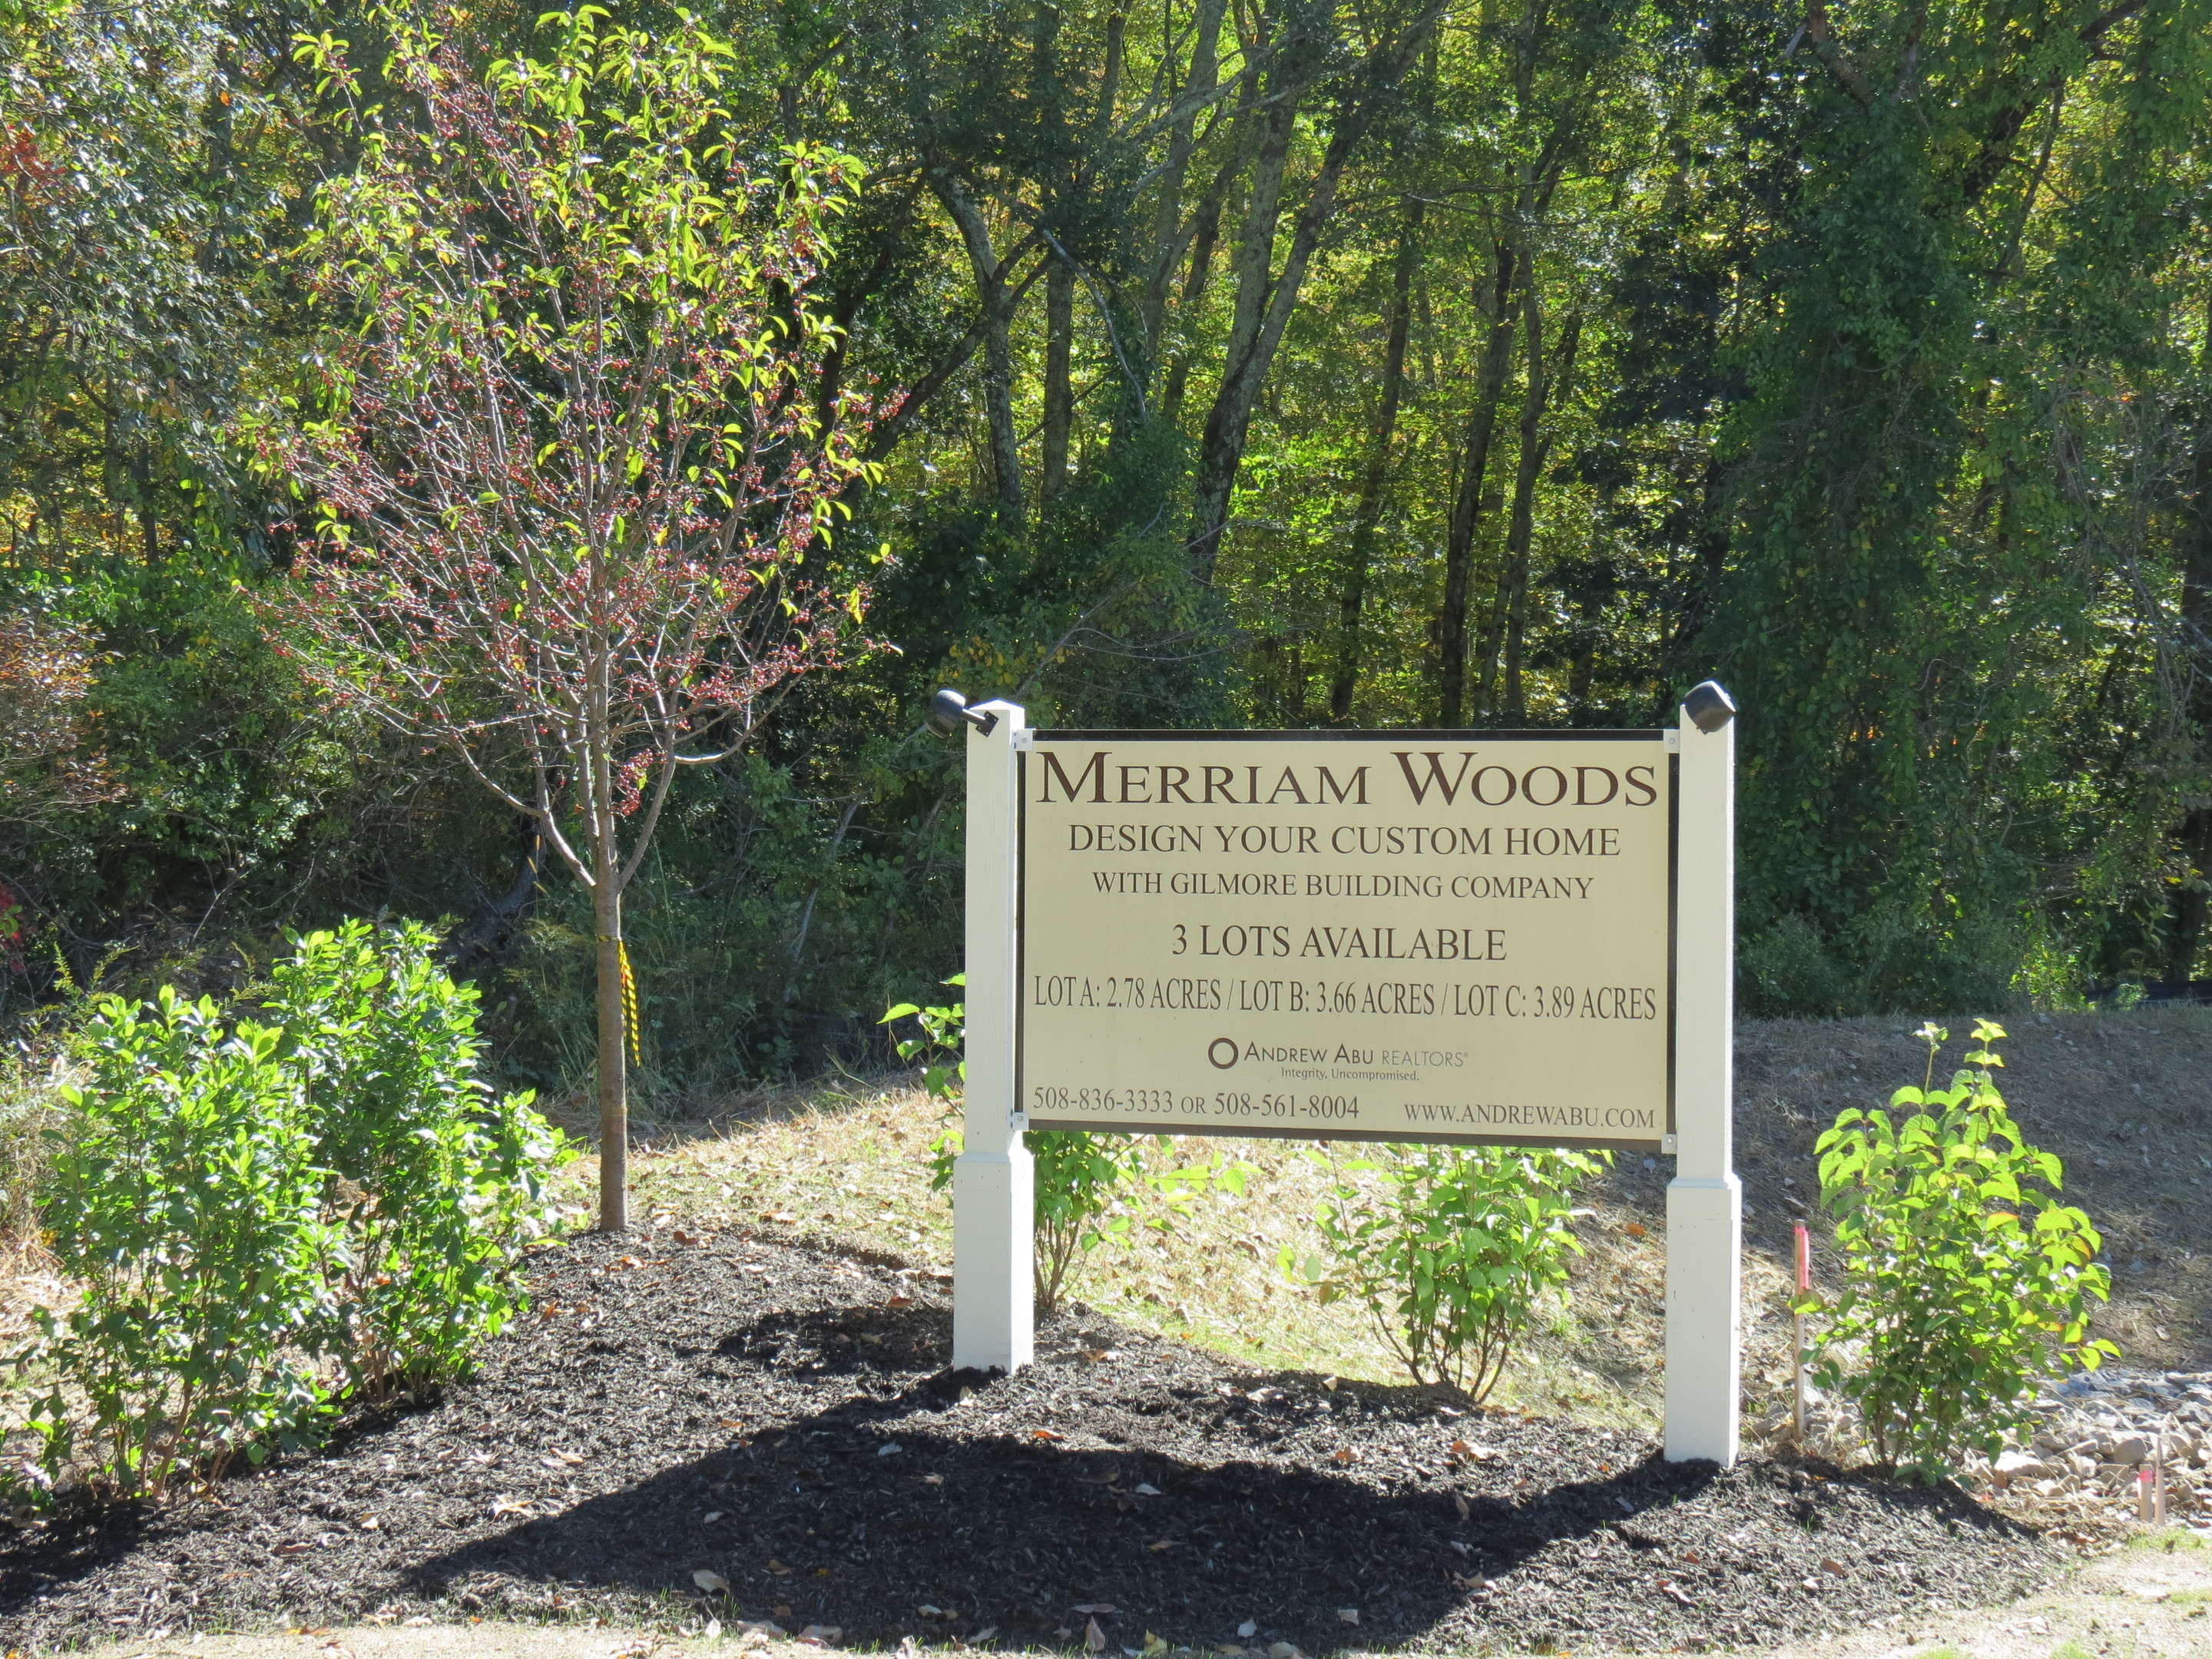 Entrance sign to Merriam Woods